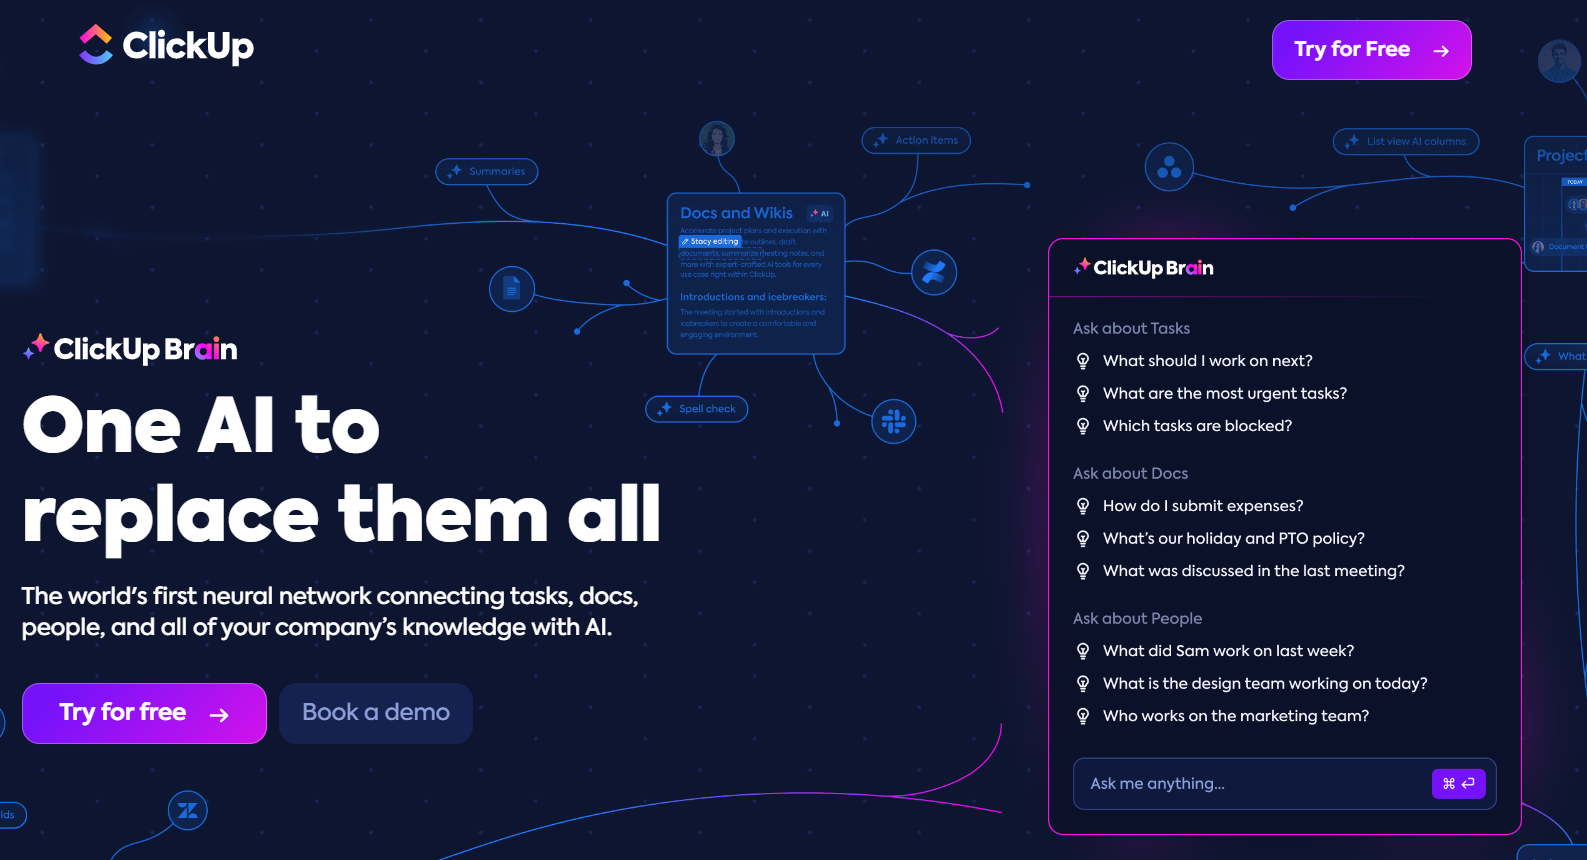 Build Product Roadmap with AI